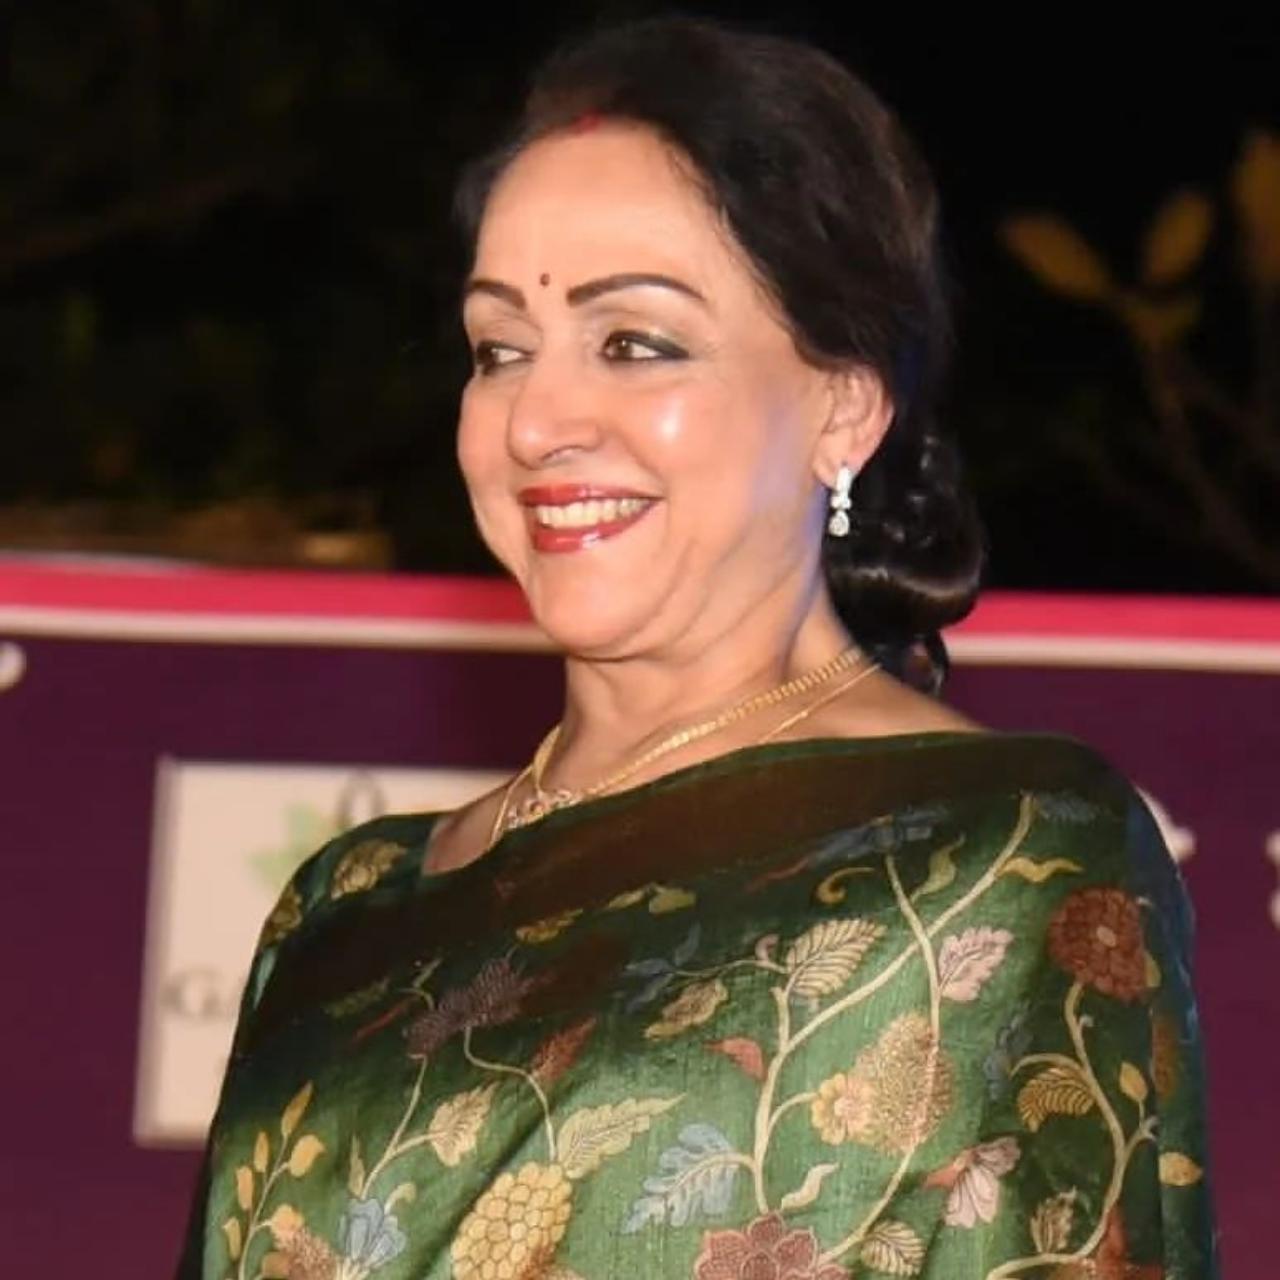 Hema MaliniNargis has truly set the standards high with her retirement from films in 1957. But with all the leading ladies who were ruling the glam world from the 1950s to the early 1970s, the entry of Hema Malini truly made them all retire in this period. Having been bestowed with the title of 'The Dream Girl', Hema Malini was the most bankable star in the 1970s. The charming and innocent beauty was the one leading lady who subsequently made her mark opposite the leading men of the industry. Her successful run over the years was defined by the films like 1970 (Johny Mera Naam), 1972 (Seeta Aur Geeta), 1975 (Sholay), and 1976 (Dus Numbri)